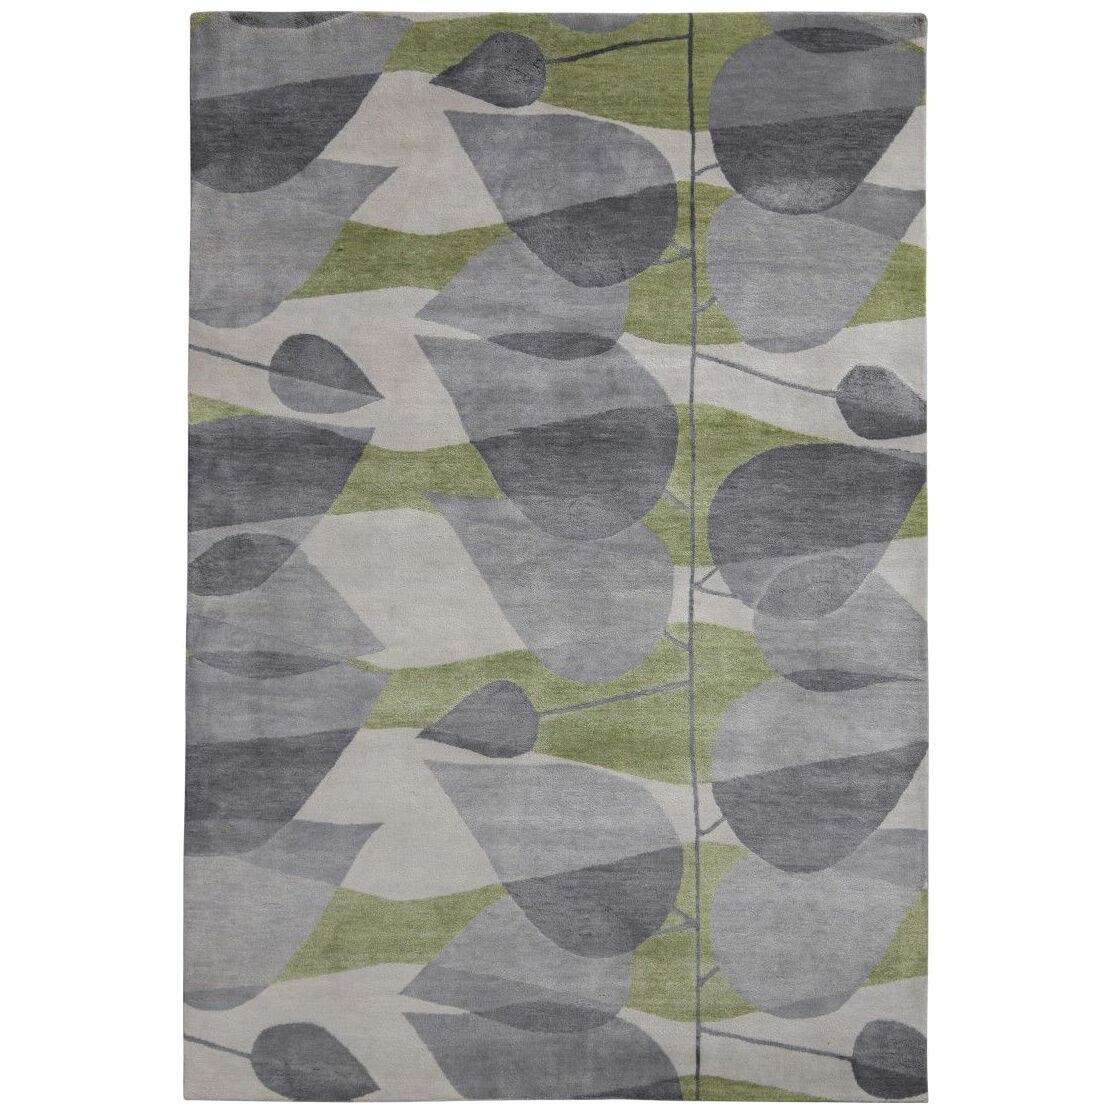 Rug & Kilim’s Mid-century Modern Style Rug in Gray and Green All Over Pattern